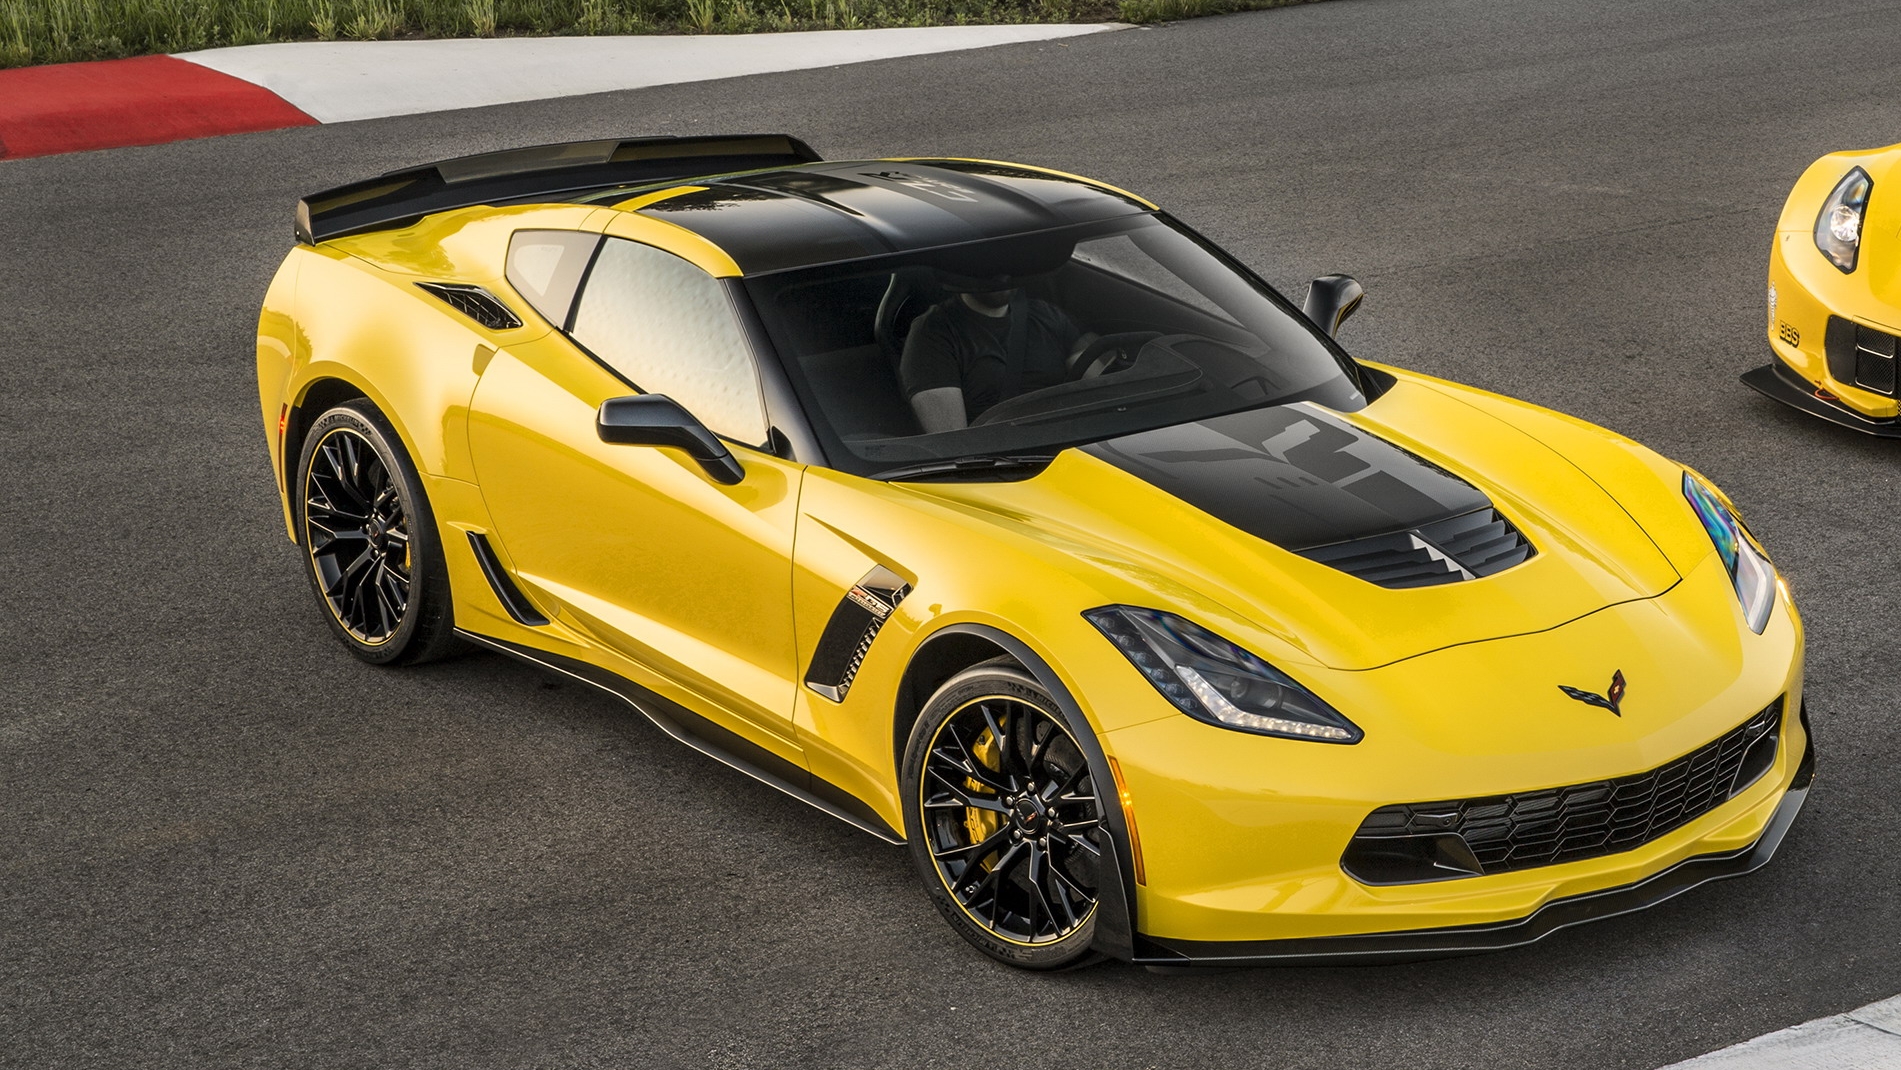 2016 Chevy Corvette Z06 Yellow POSTER 24 X 36 INCH TRACK.